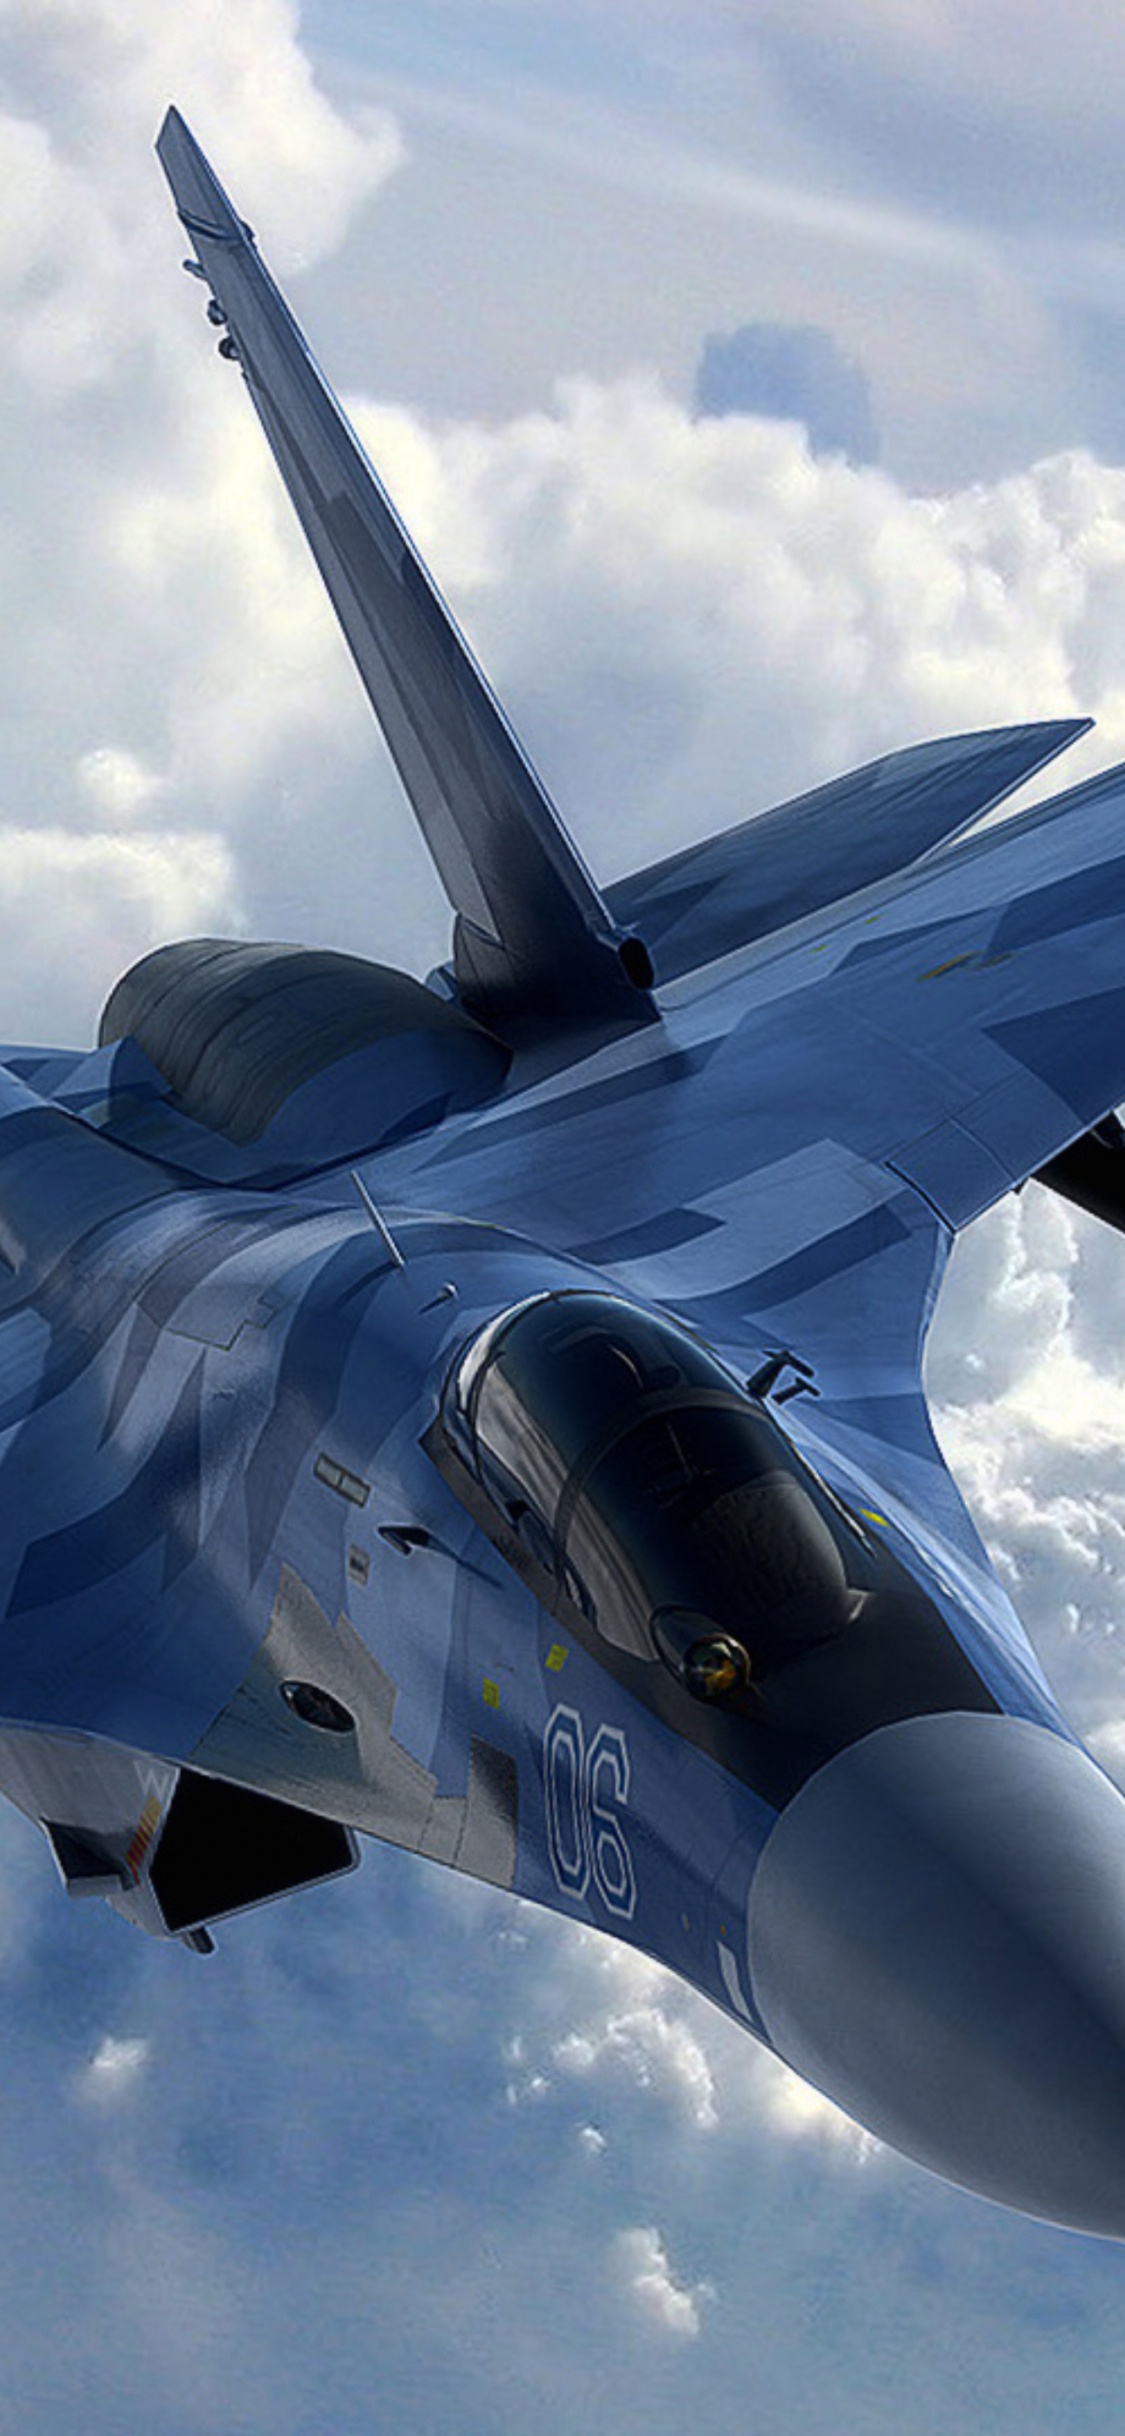 Gray Fighter Jet Flying in The Sky. Wallpaper in 1125x2436 Resolution